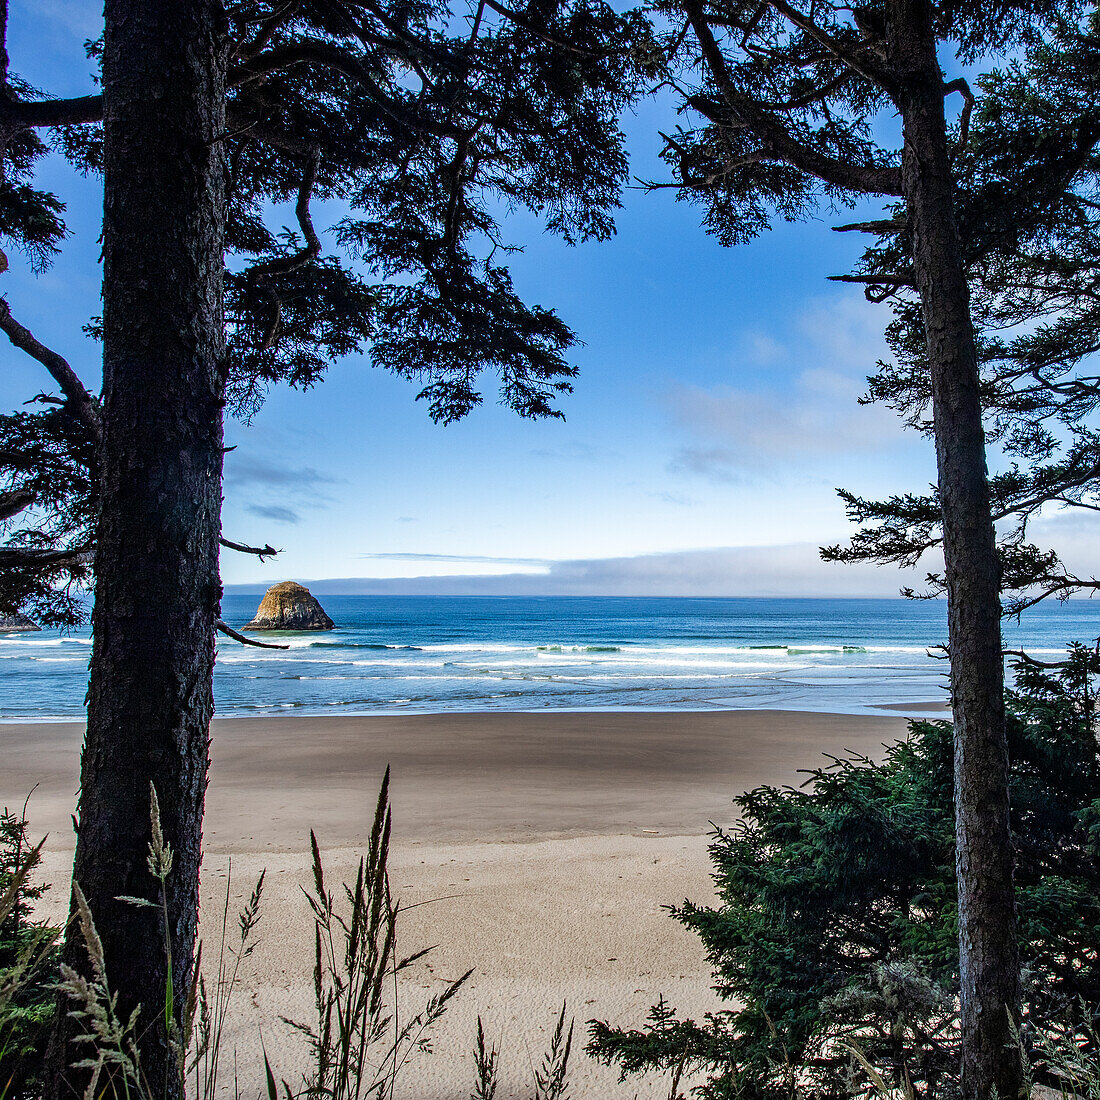 USA, Oregon, Pine trees and rock formation at Cannon Beach 